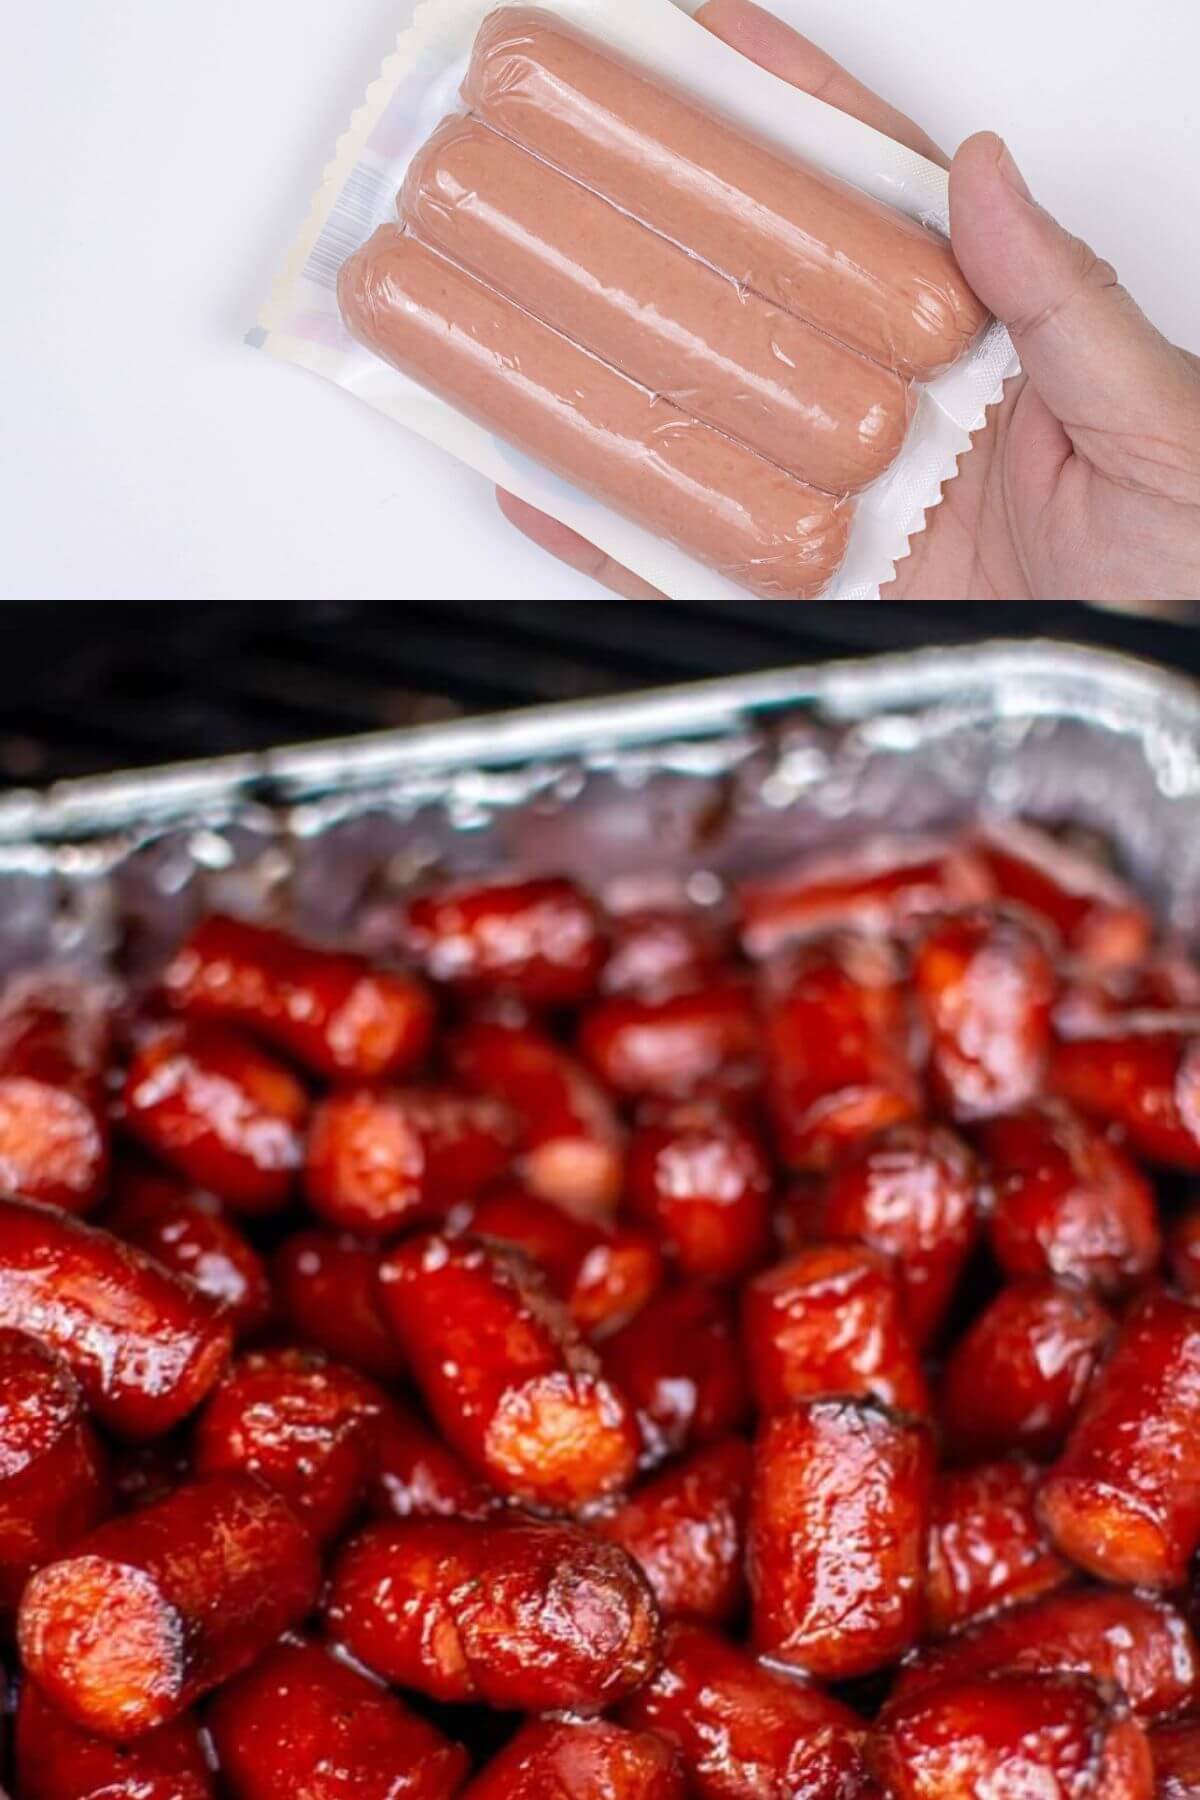 Images of raw packaged hot dogs and barbecued hot dogs.